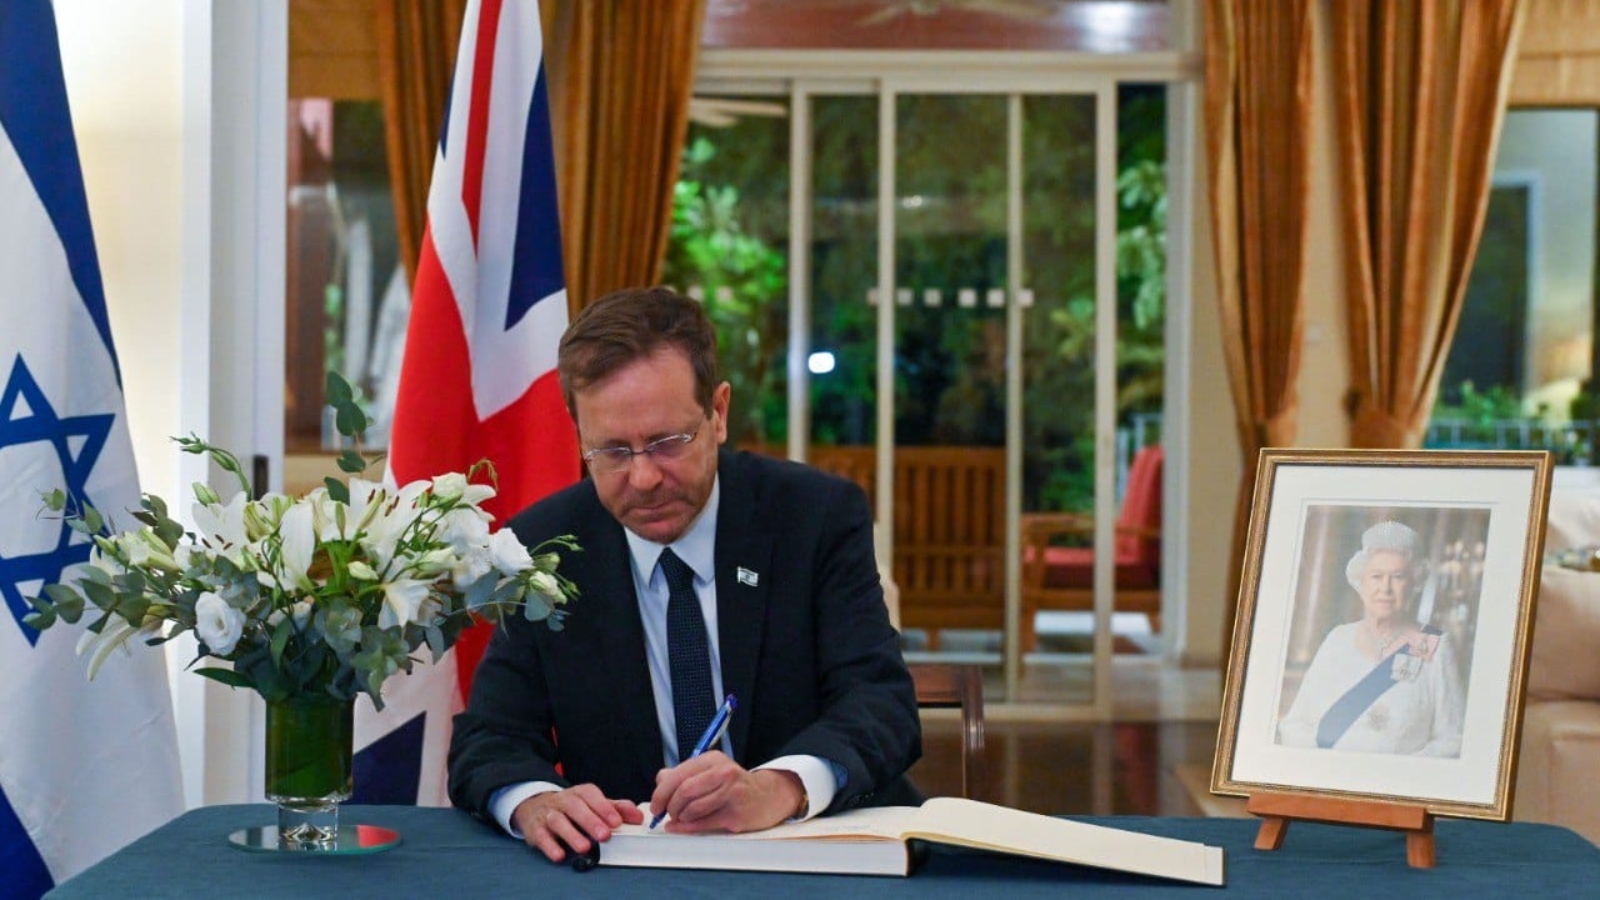 President Isaac Herzog signs the condolence book for Queen Elizabeth II at the British ambassador's residence in Israel. Photo by Koby Gideon/GPO